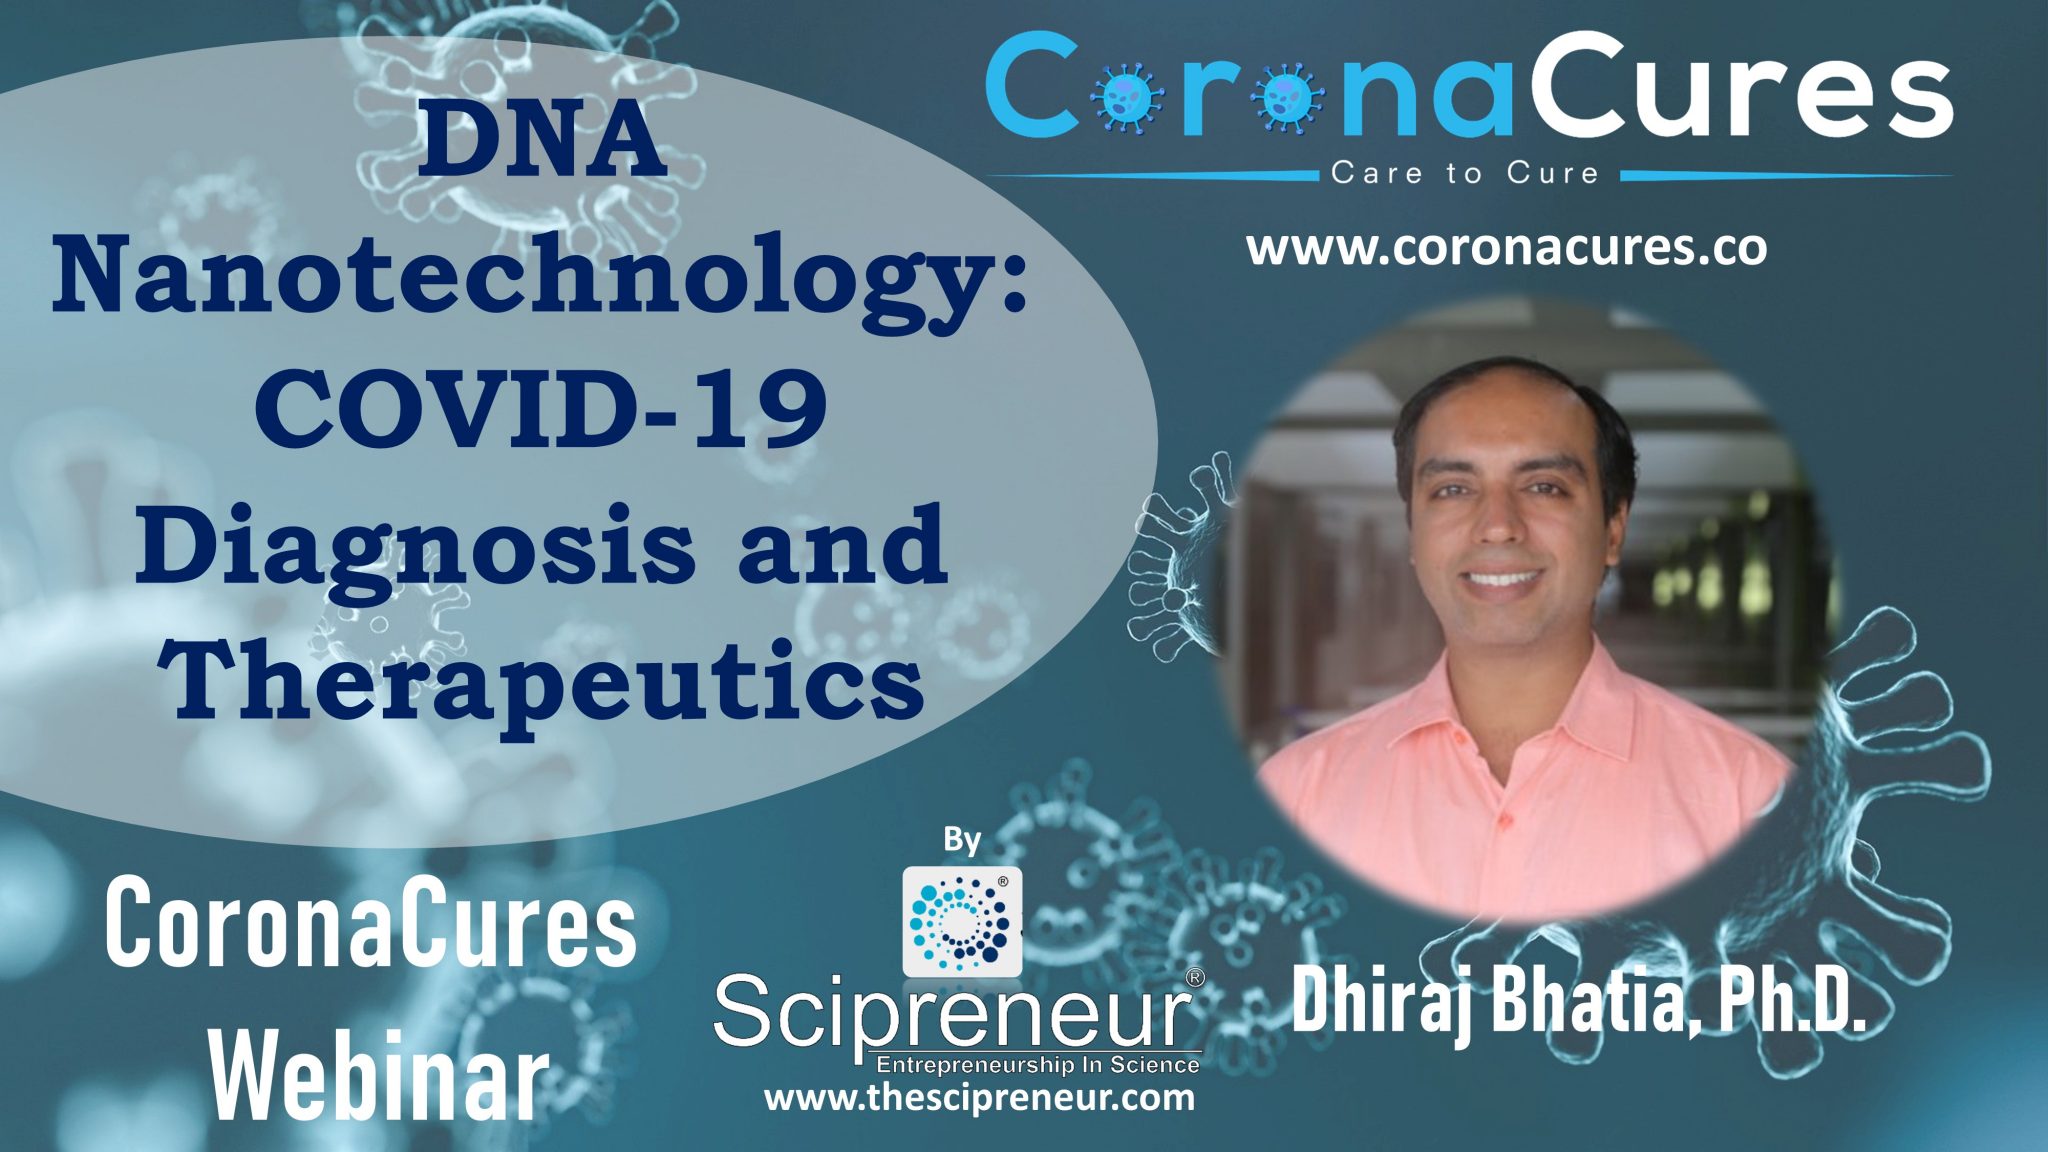 “DNA Nanotechnology” COVID19 Diagnosis and Therapeutics CoronaCures